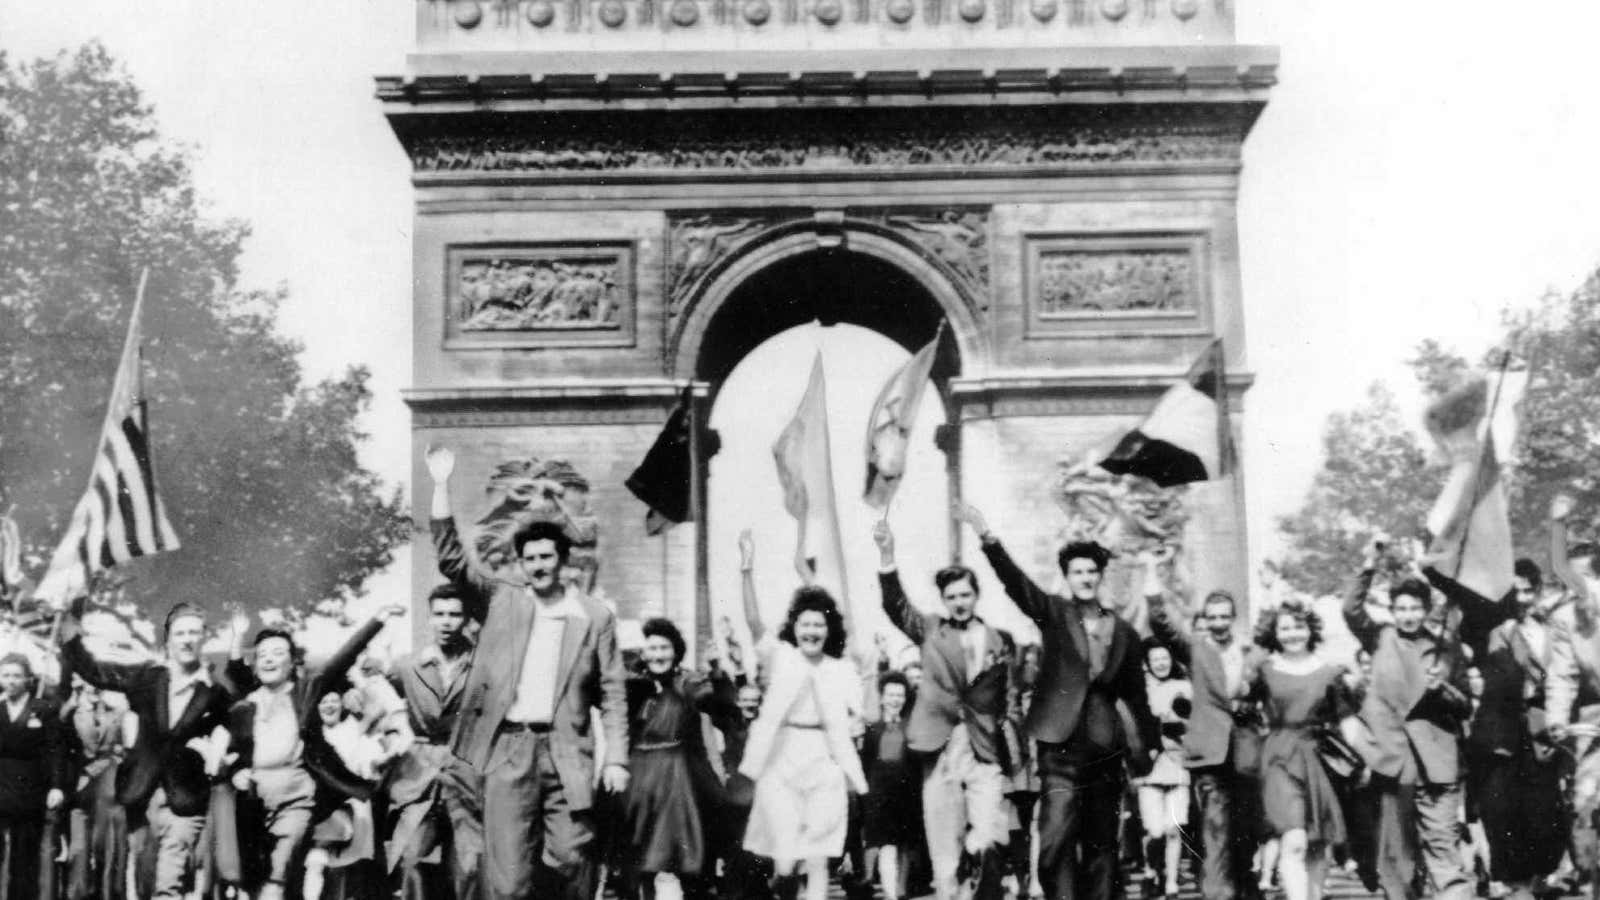 Parisians march through the Arc de Triomphe jubilantly waving flags of the Allied Nations as they celebrate the end of World War II on May 8, 1945.